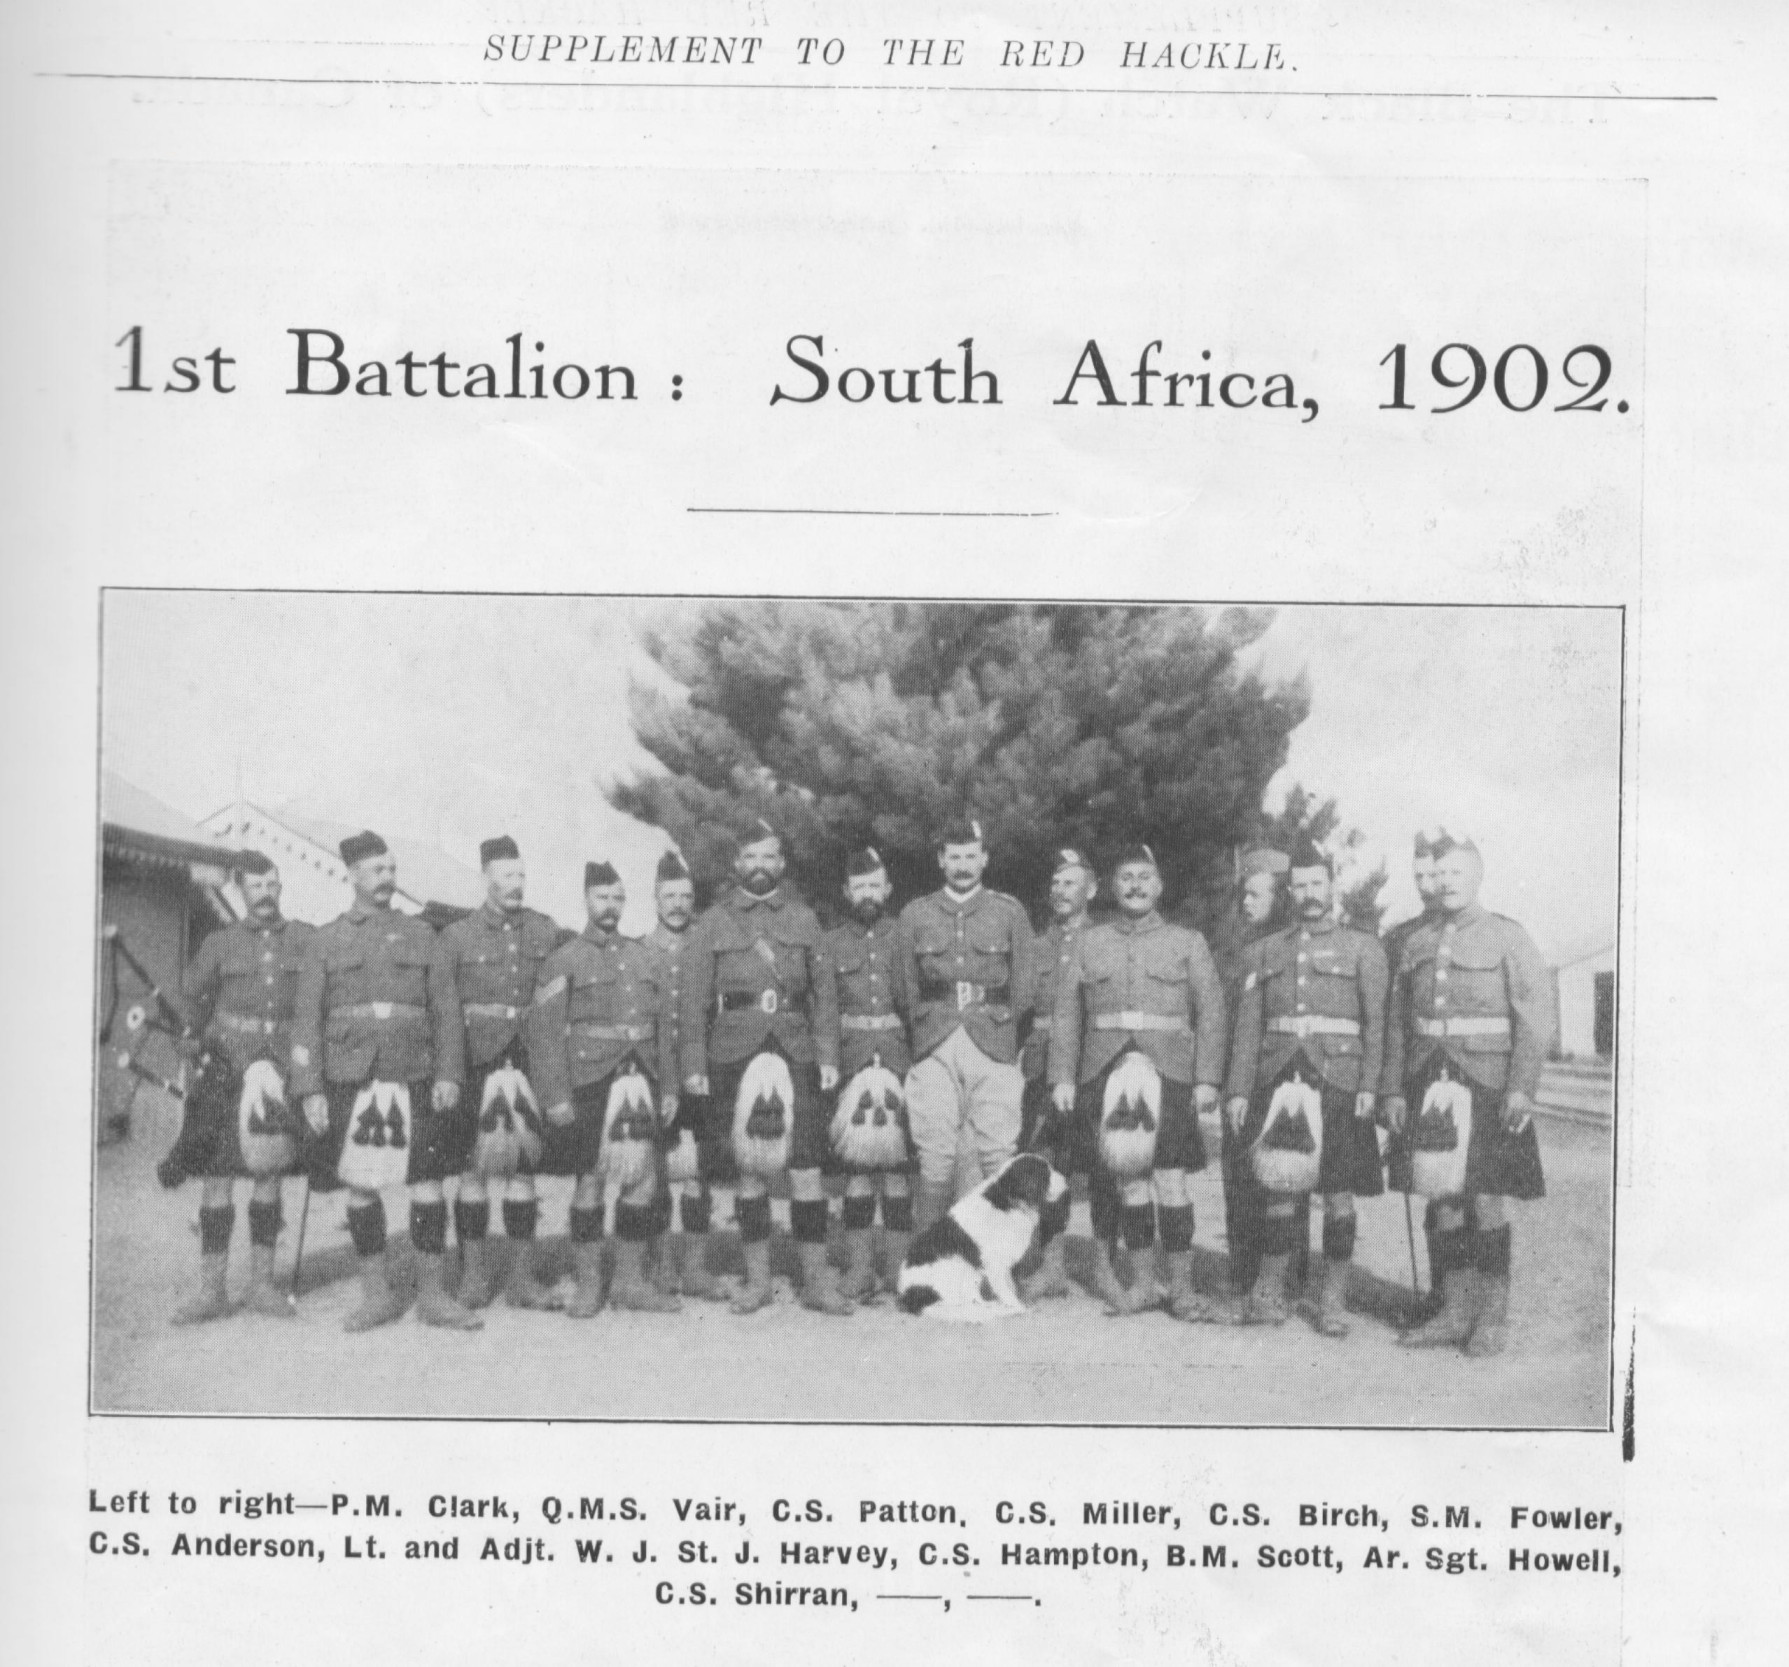 newspaper photo\' showing two rows of soldiers standing in kilts, flanking one in ill-fitting jodhpurs, with a black-and-white spaniel-type dog sitting at the front; the men are not all facing the camera, there seems to be some conversation going on at the back